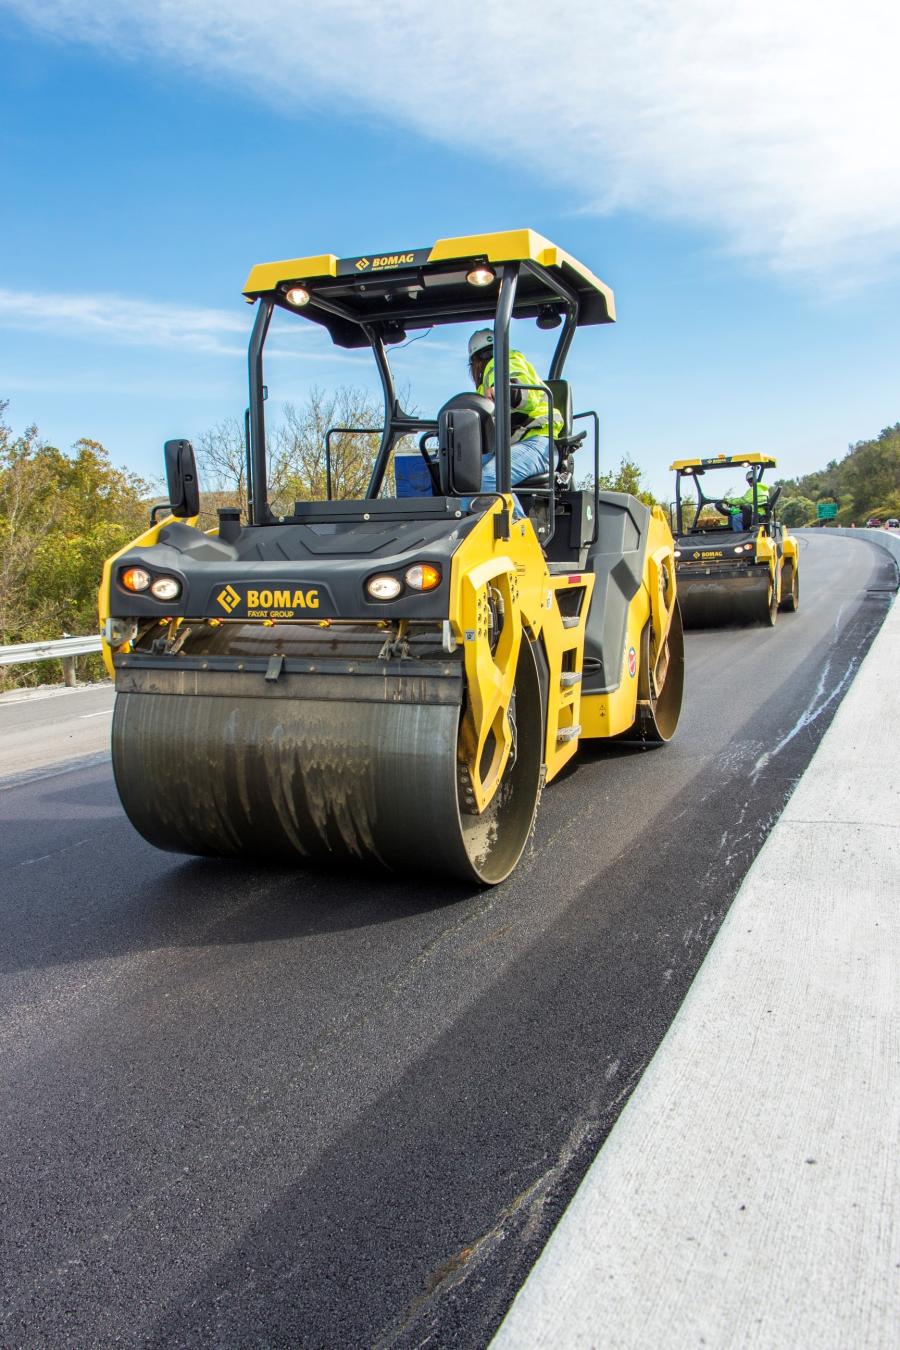 Offering design enhancements over previous series, Bomag's Dash 5 rollers increase productivity, improve mat quality and reduce service time.